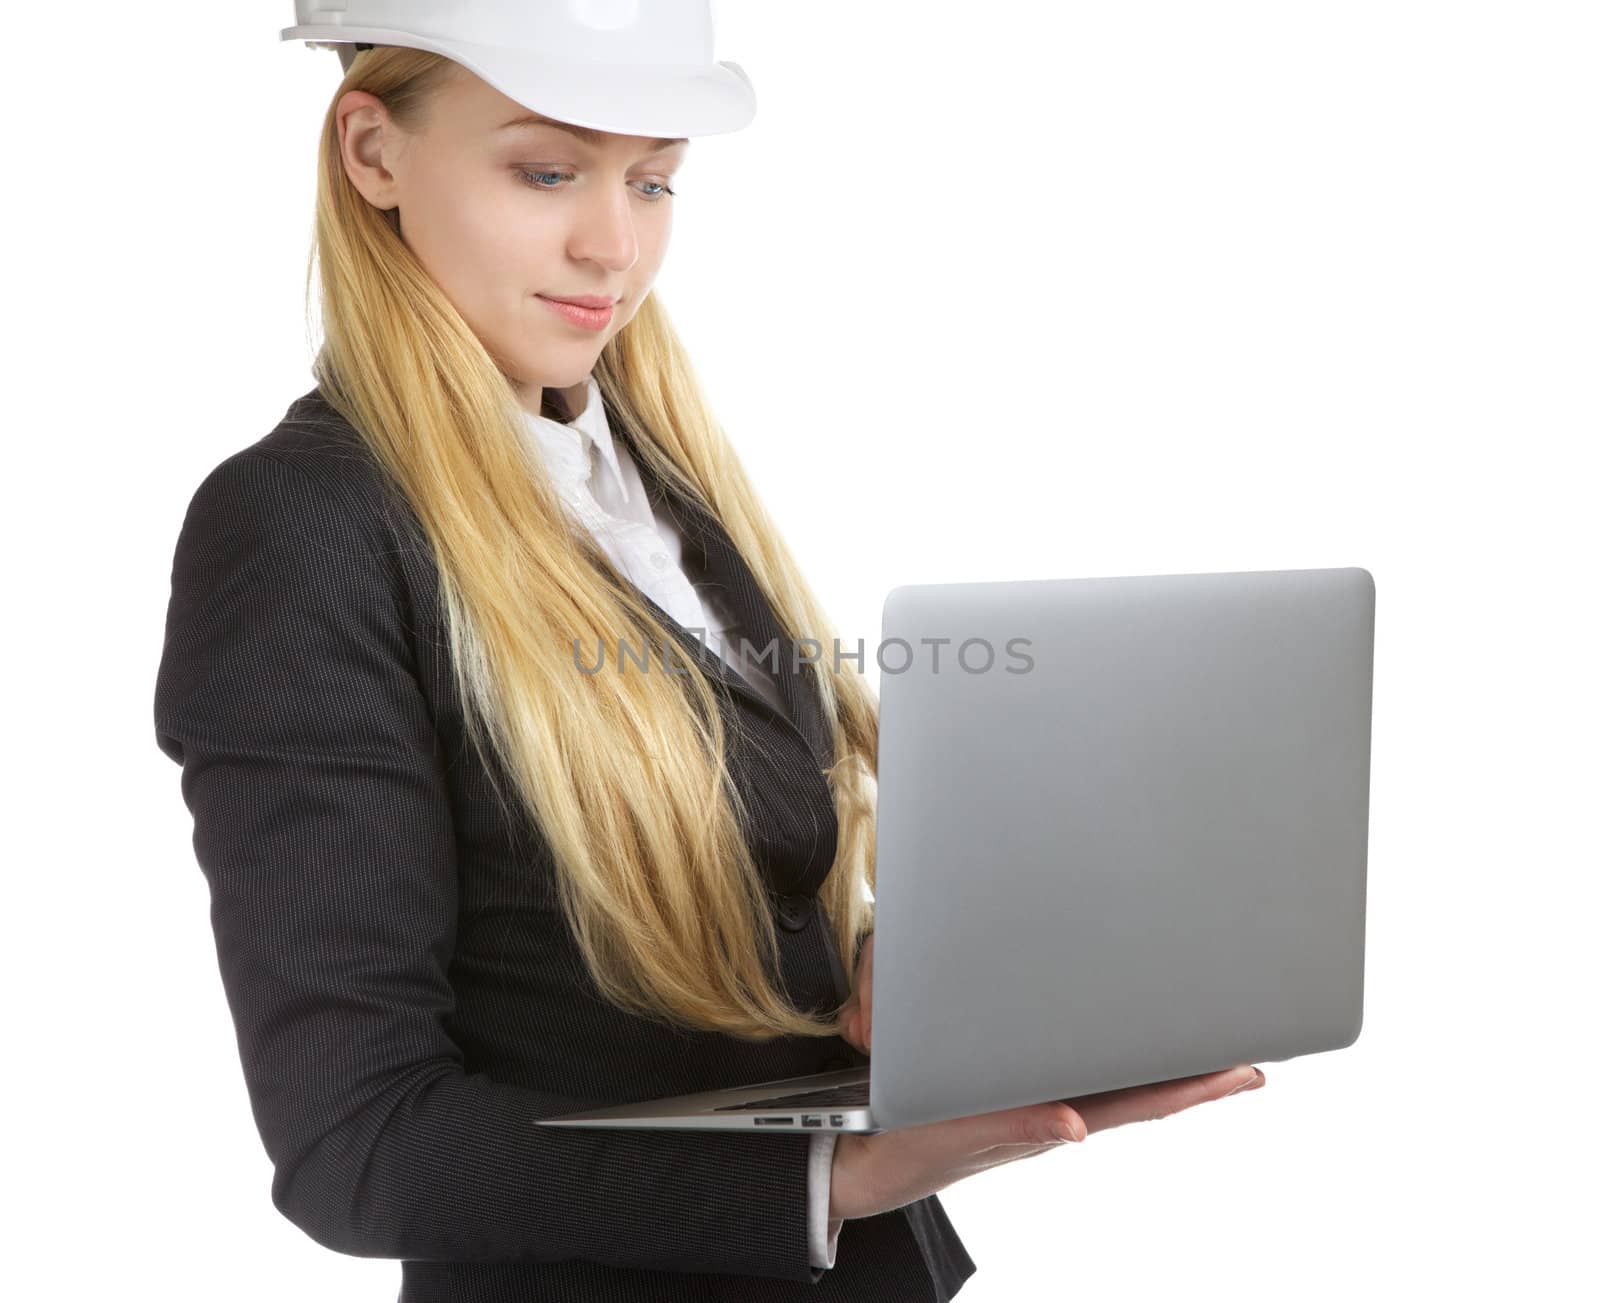 Engineer  Woman With Laptop by petr_malyshev